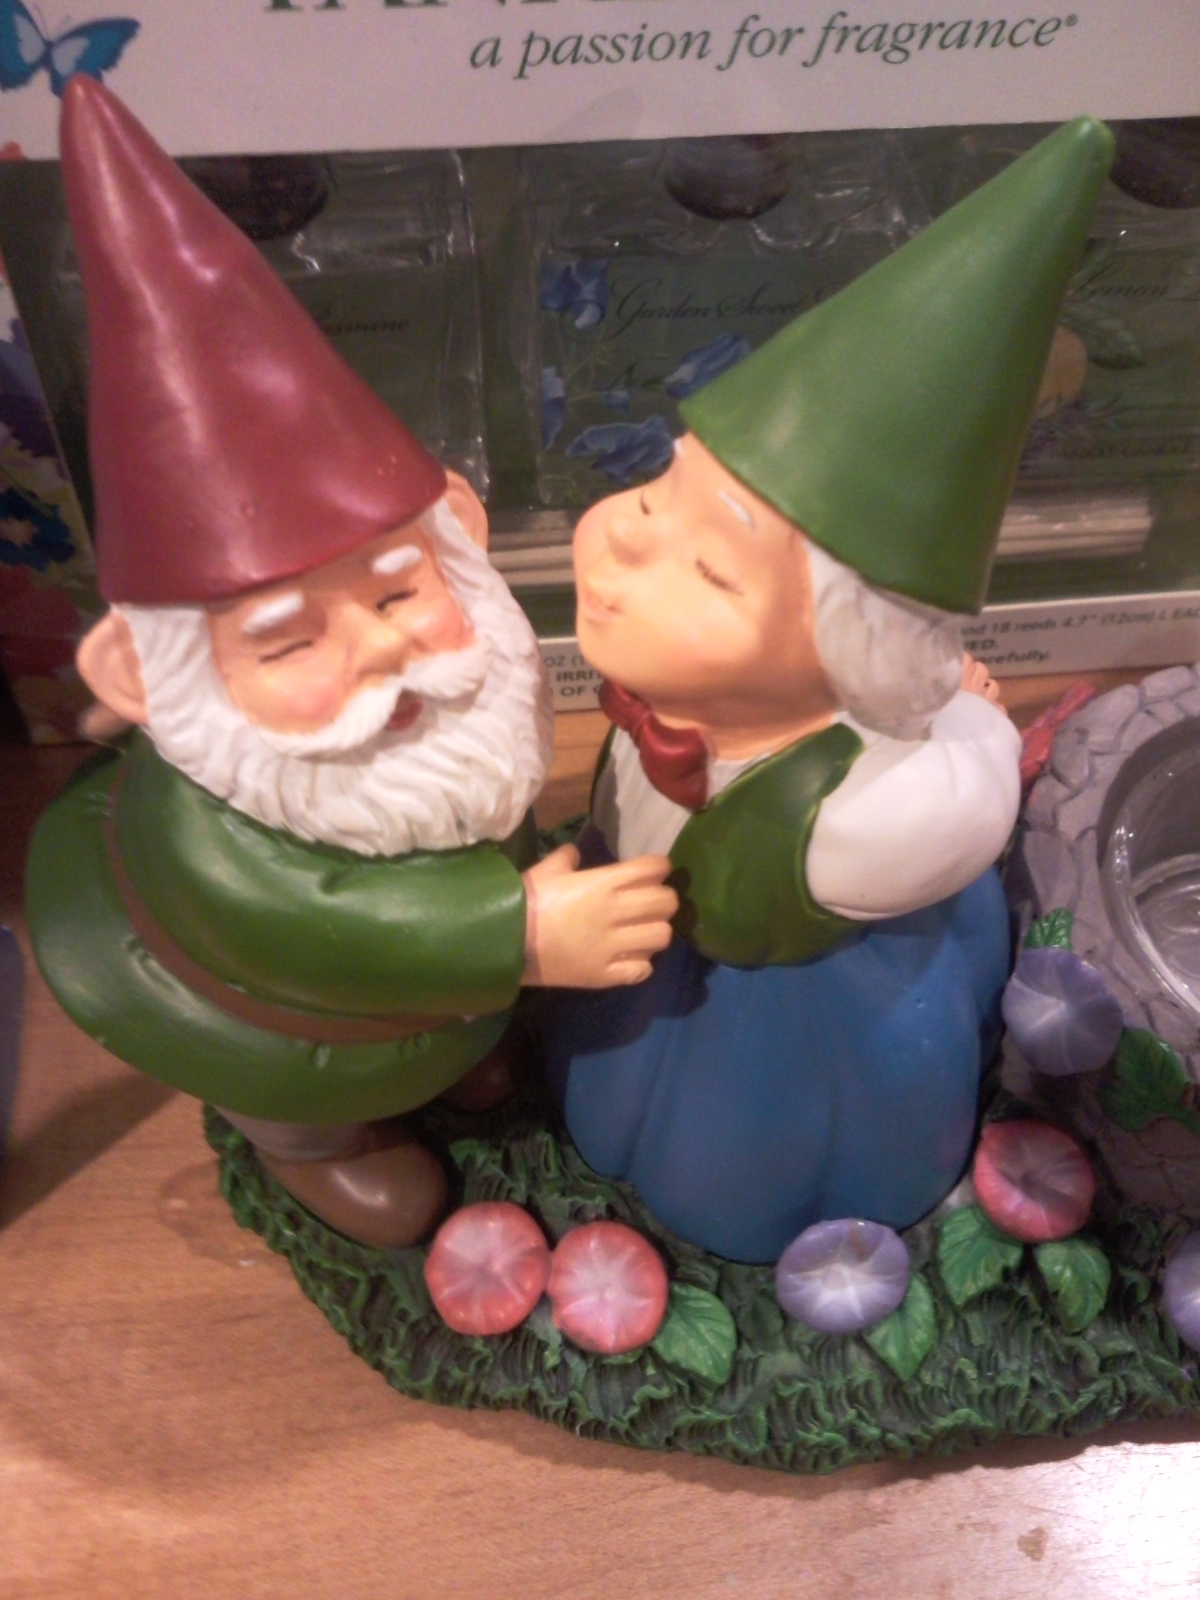 the two garden gnomes have red and green hats